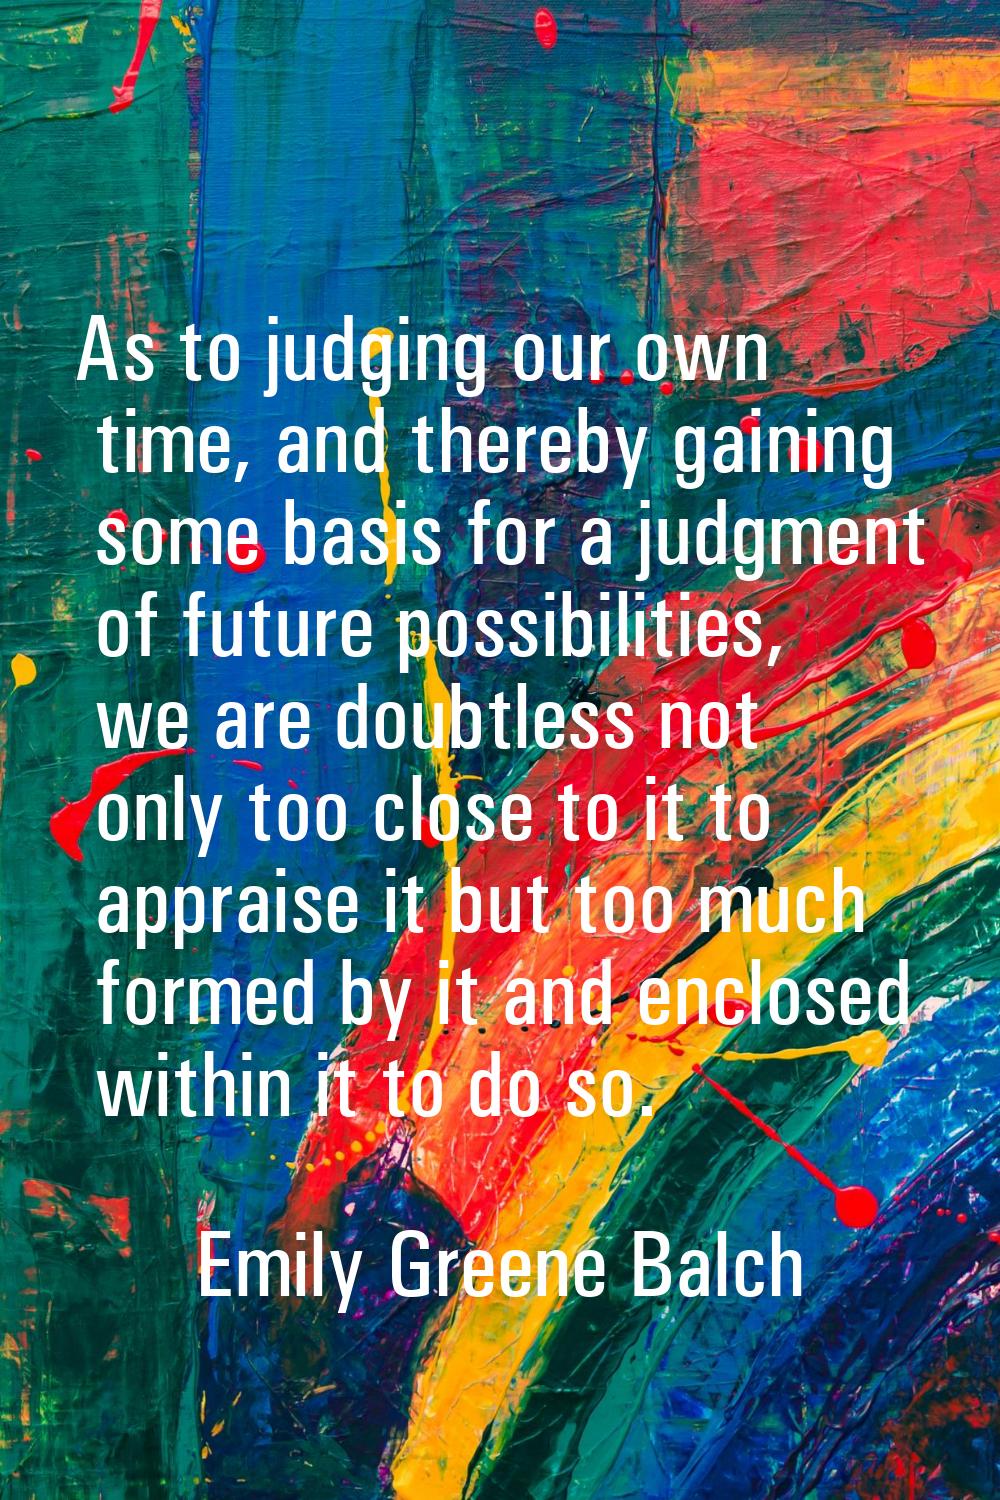 As to judging our own time, and thereby gaining some basis for a judgment of future possibilities, 